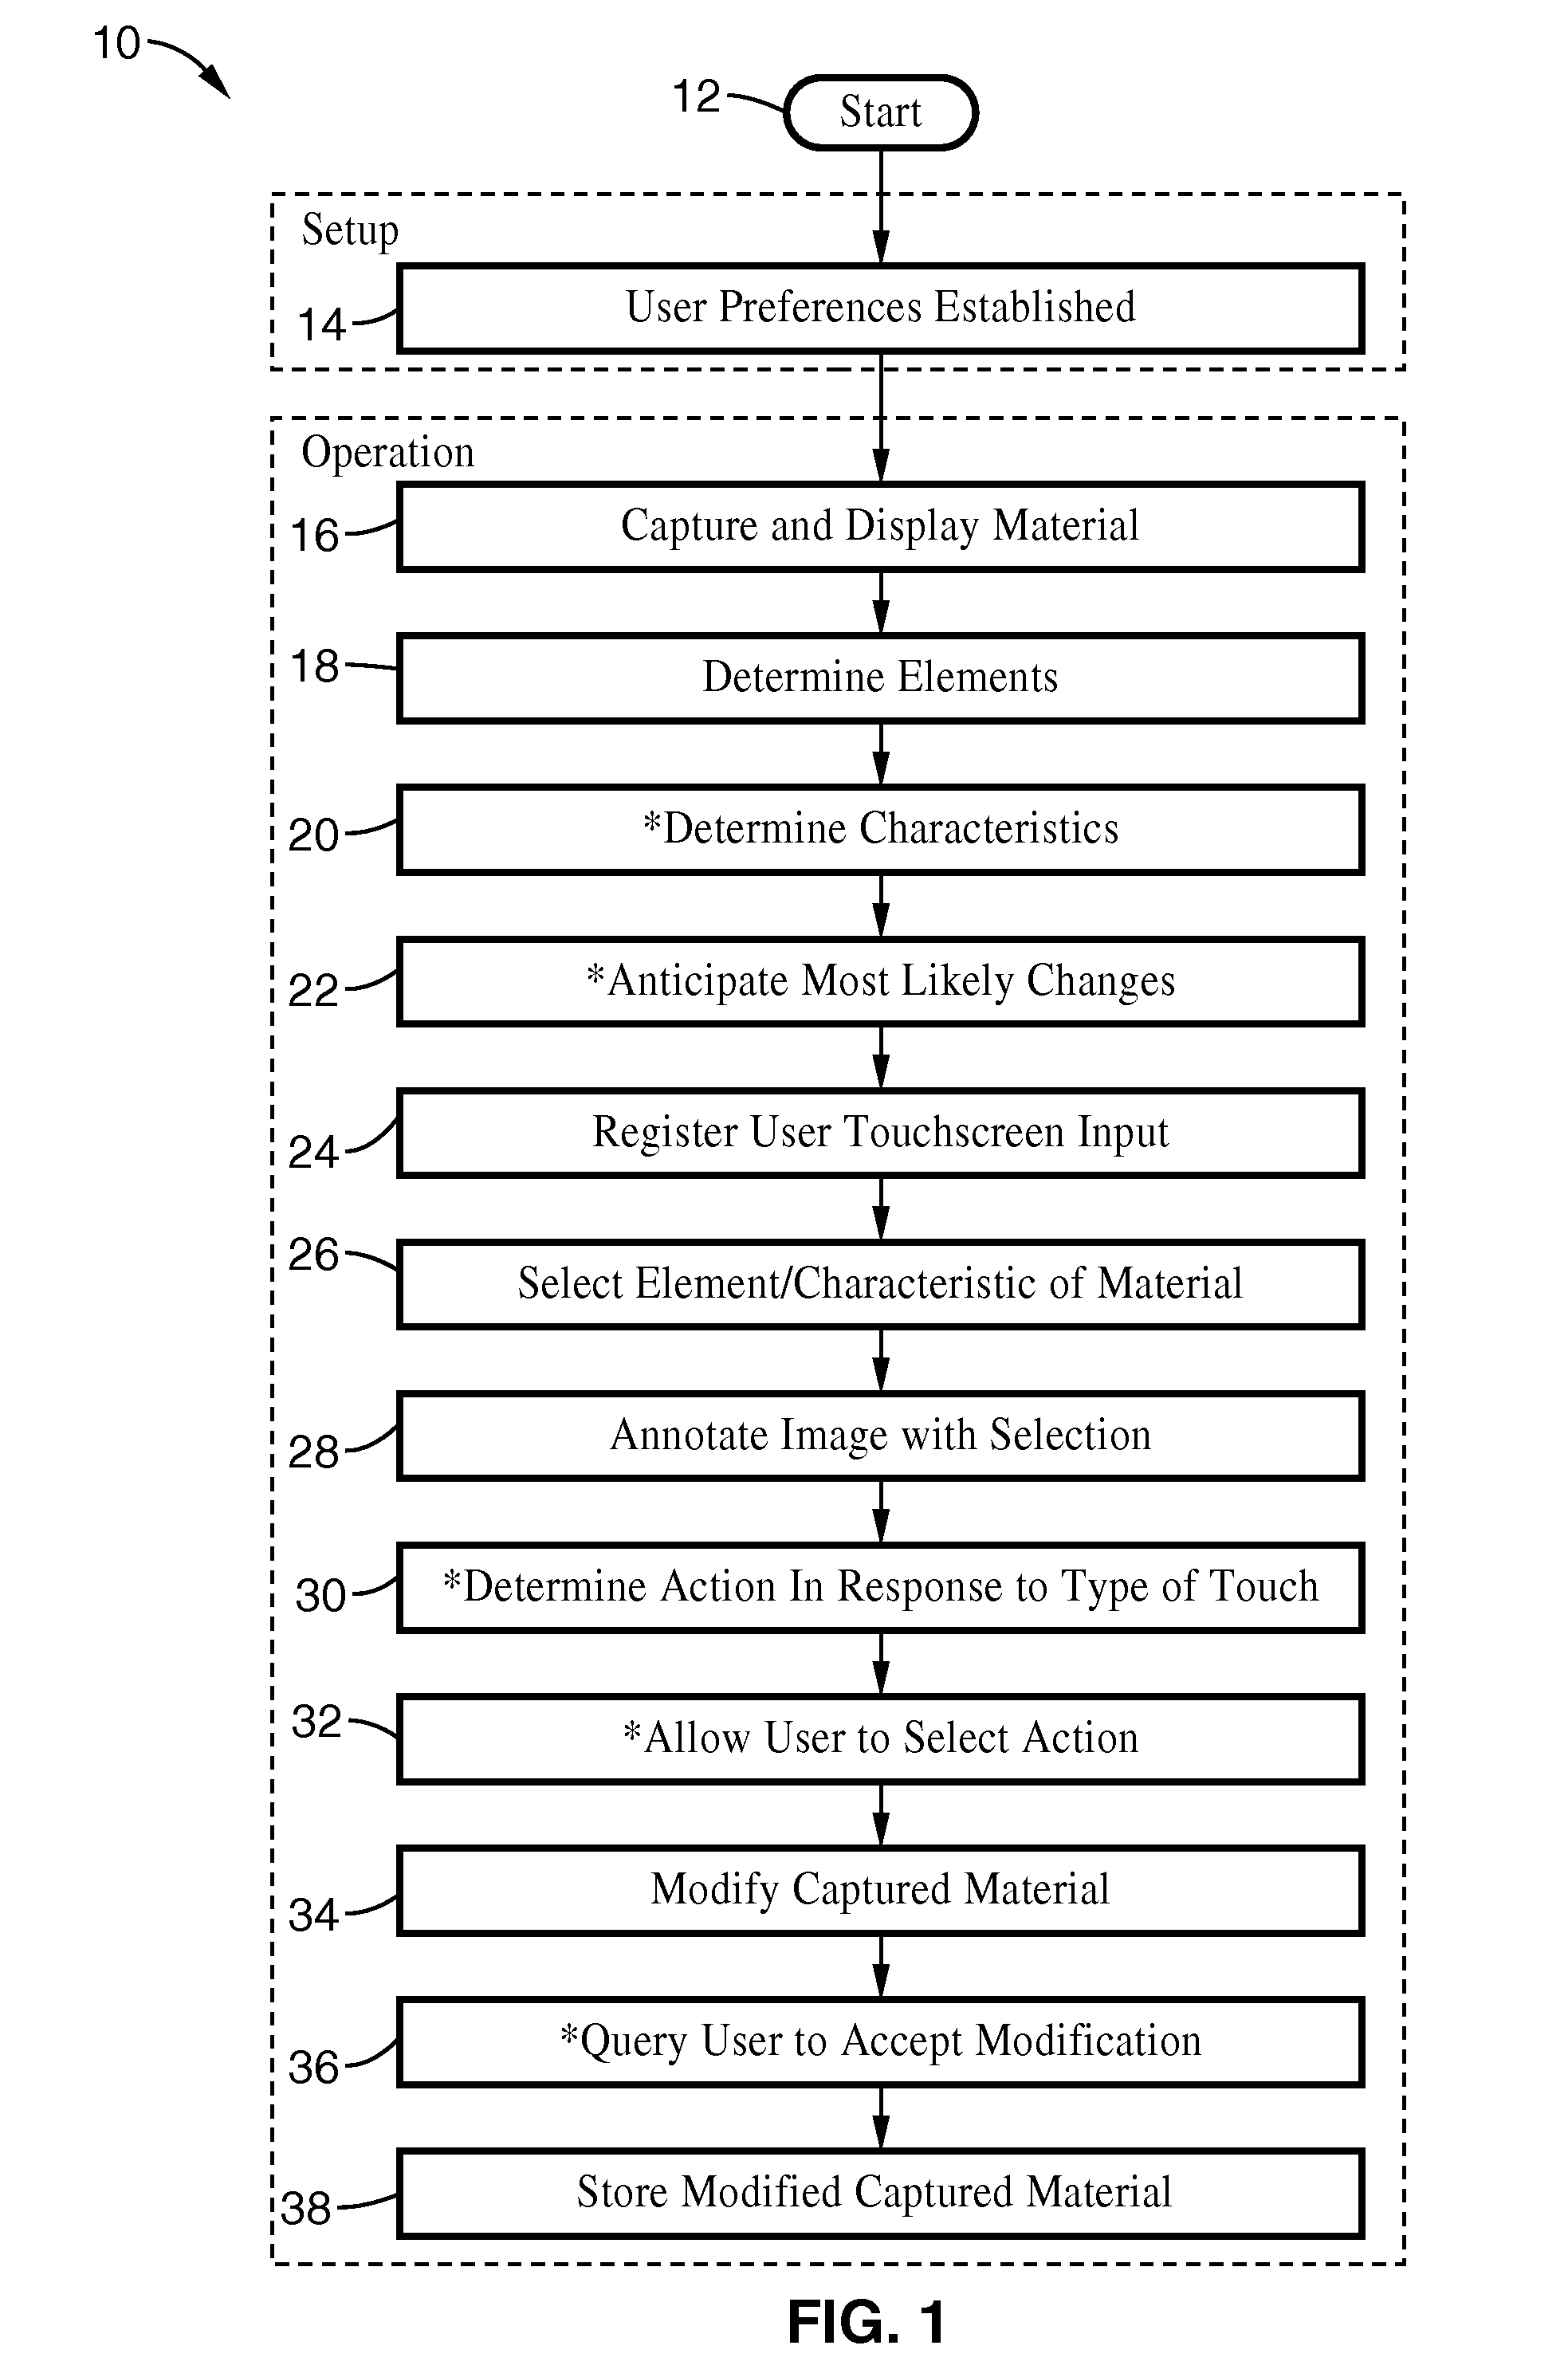 Method and apparatus for performing touch-based adjustments within imaging devices